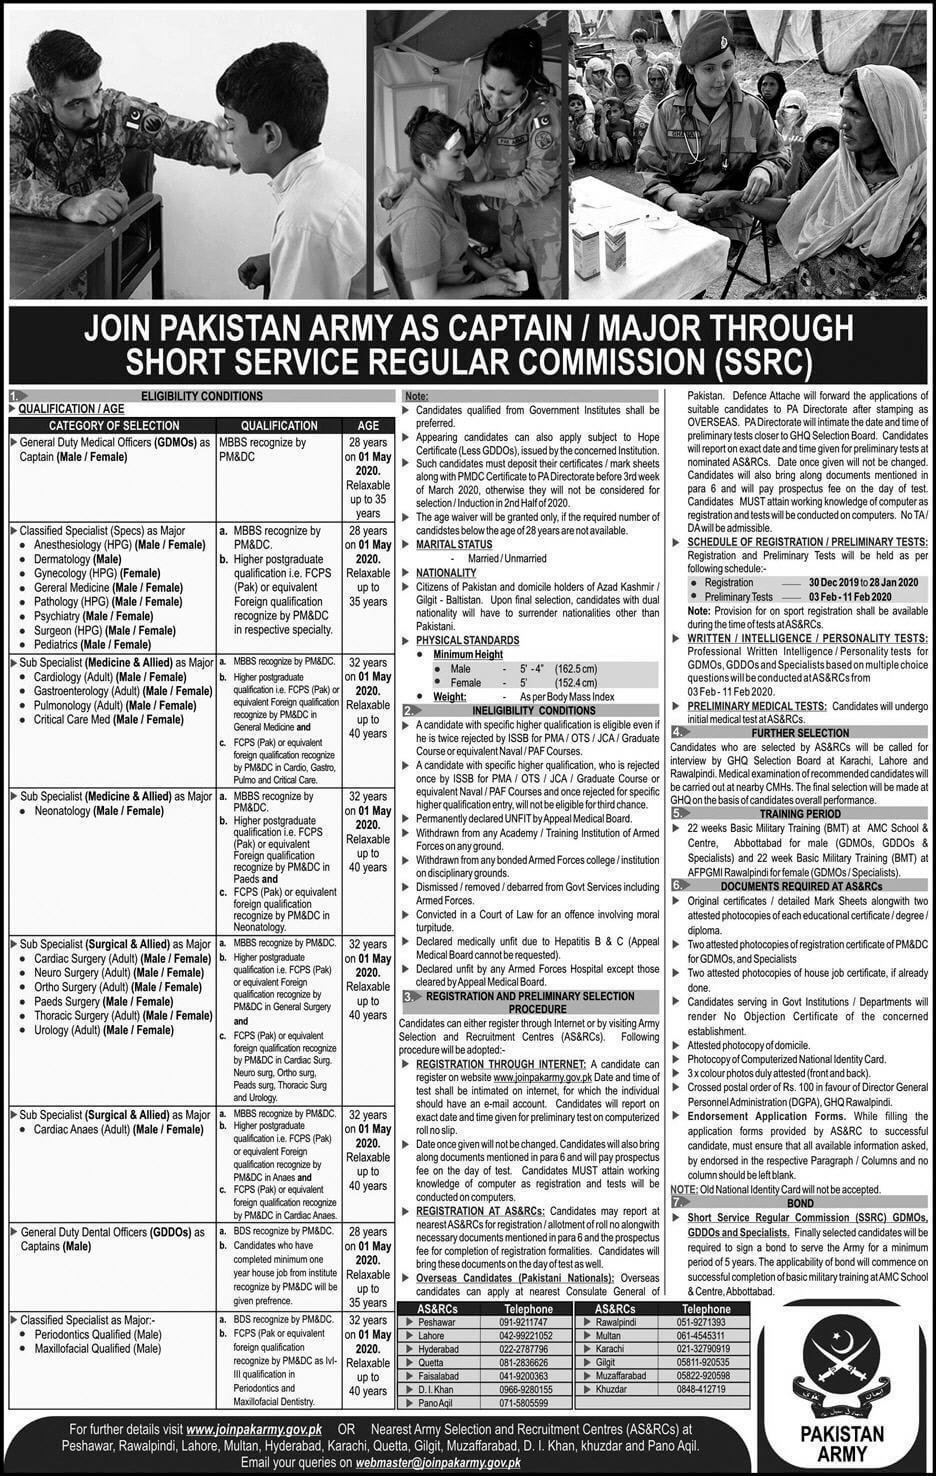 Join Pakistan Army As Captain Through hort Service Regular Commission SSRC Jobs January 2020